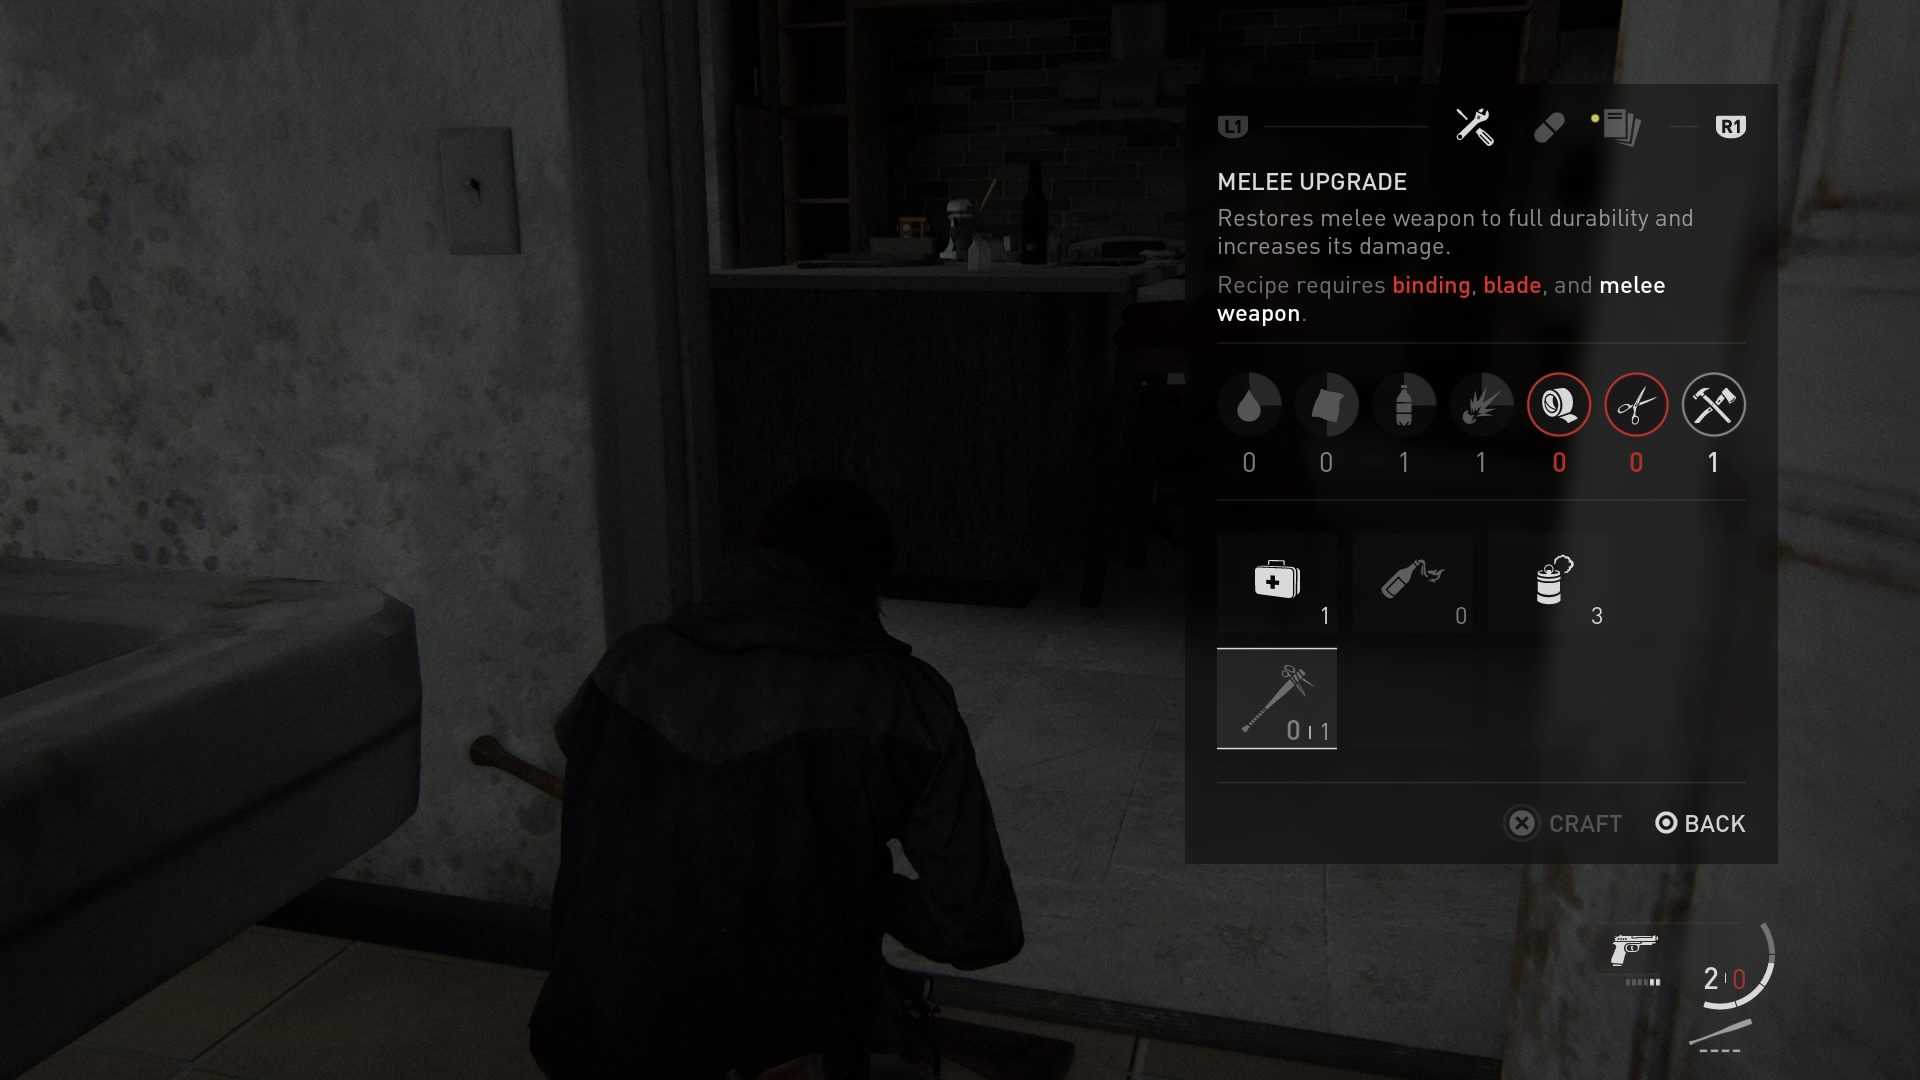 The Last Of Us Pt 2 crafting system